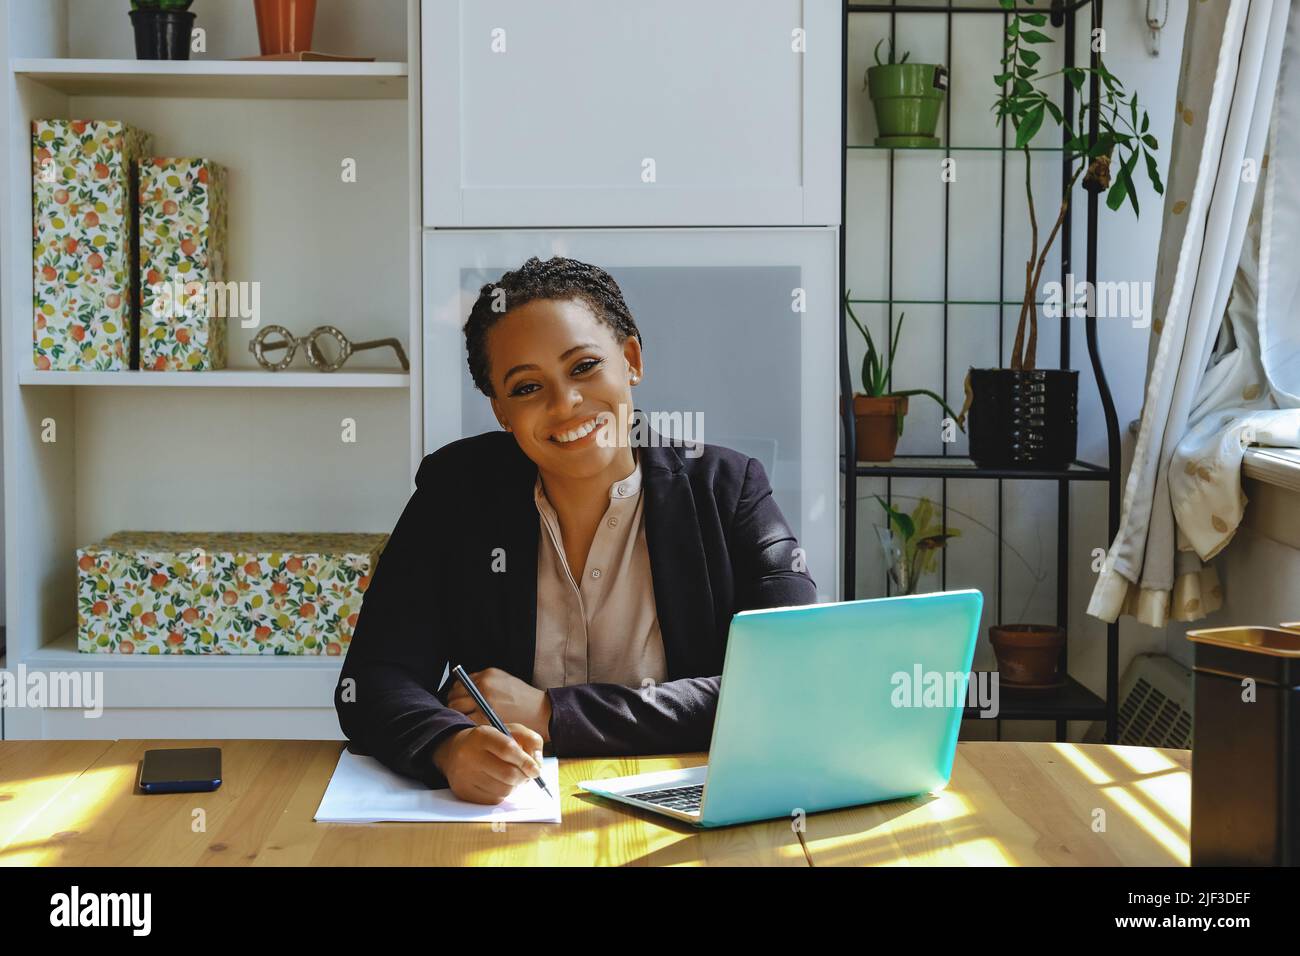 Smiling Young adult entrepreneur freelance black woman small business owner with laptop working in home office looking at camera shot Stock Photo